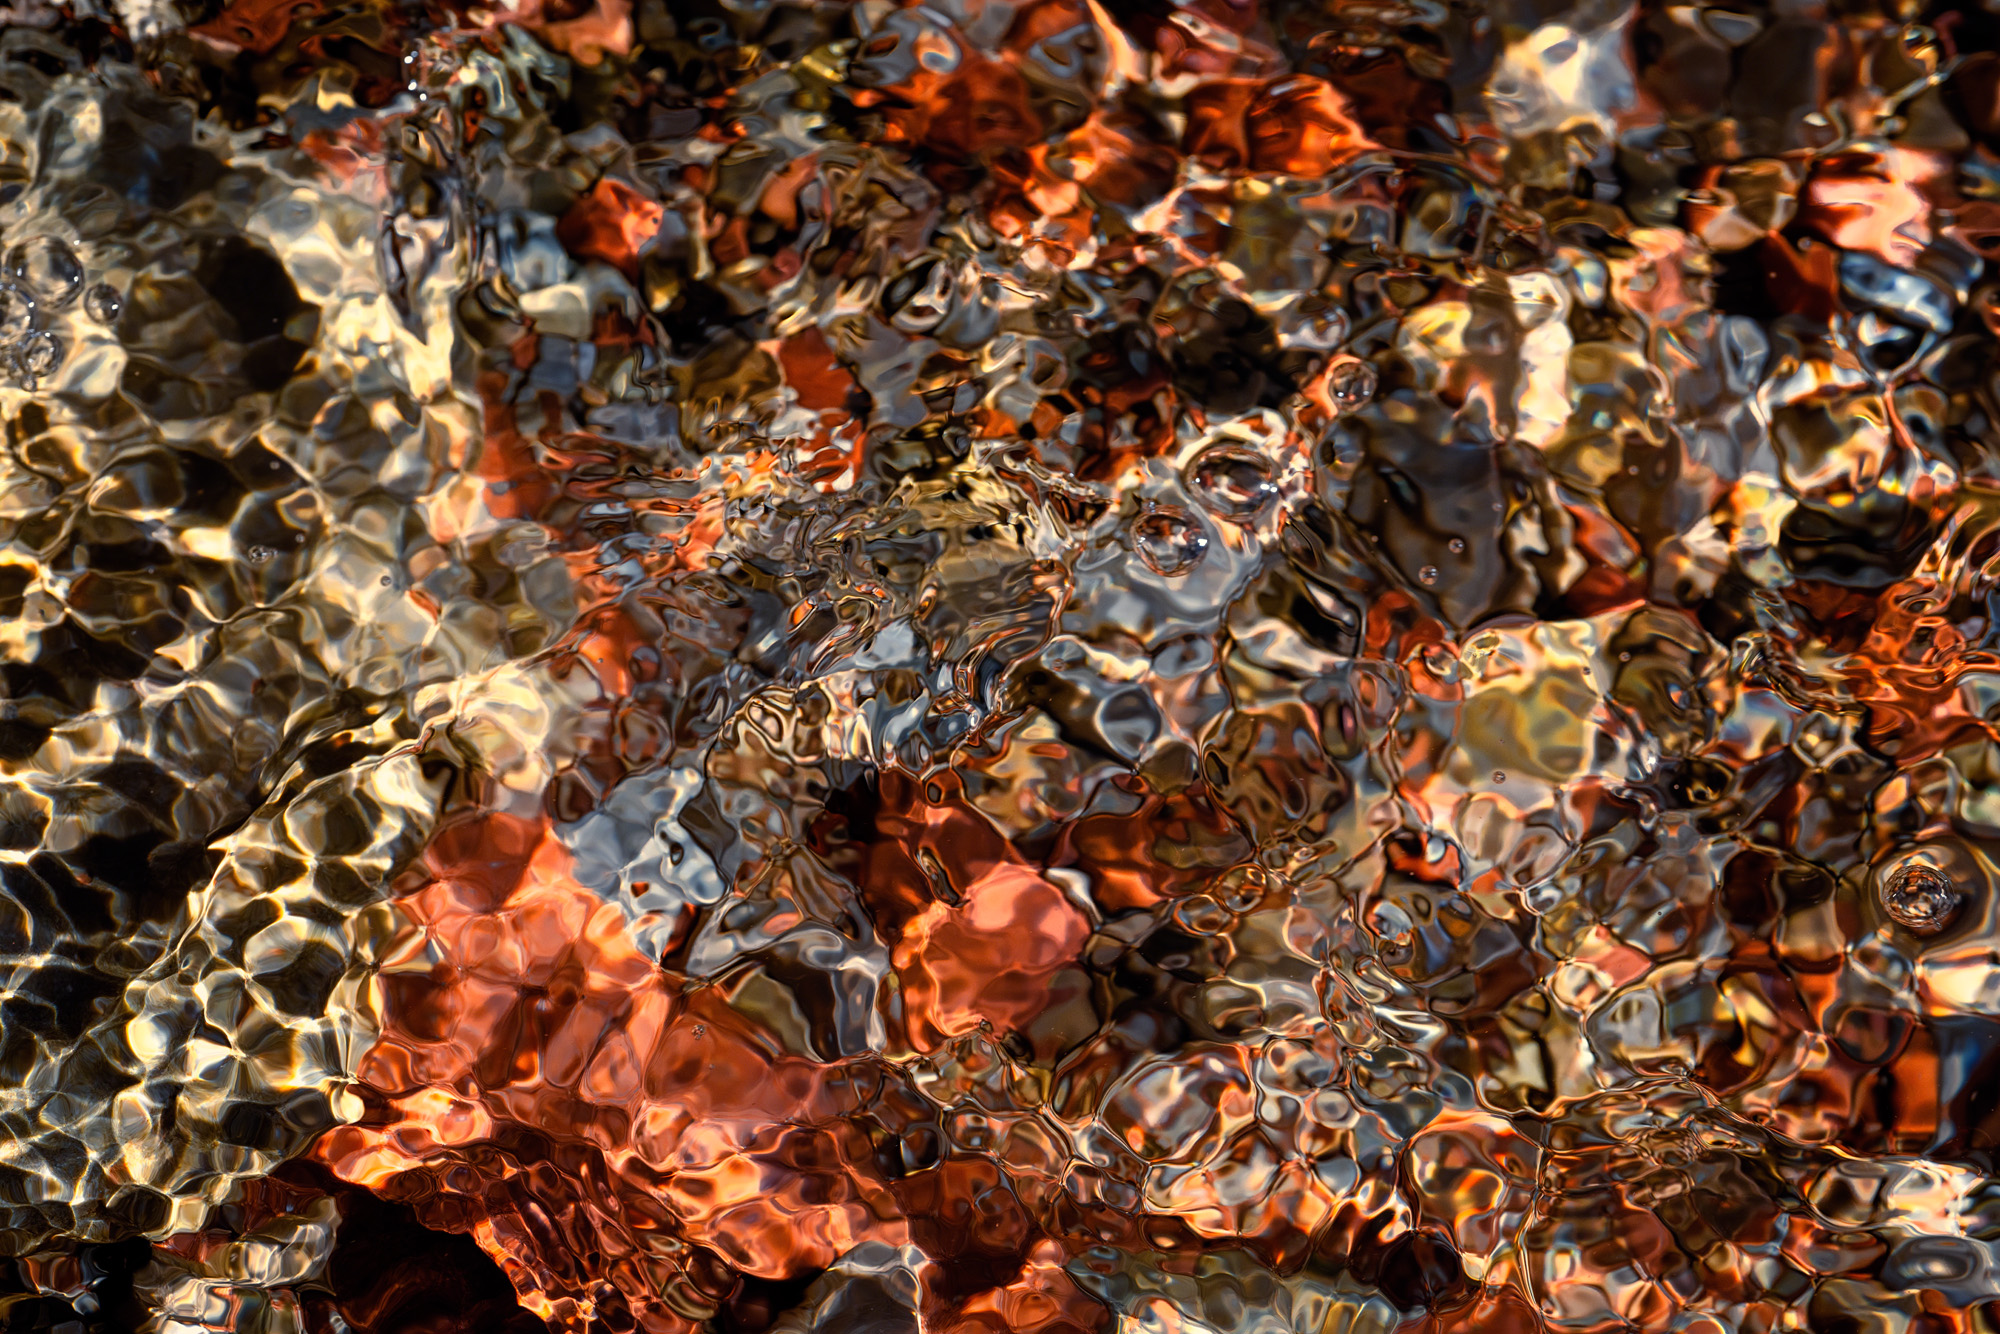 A kaleidoscopic assortment of color forms the basis of this macro shot of Zion's river streams